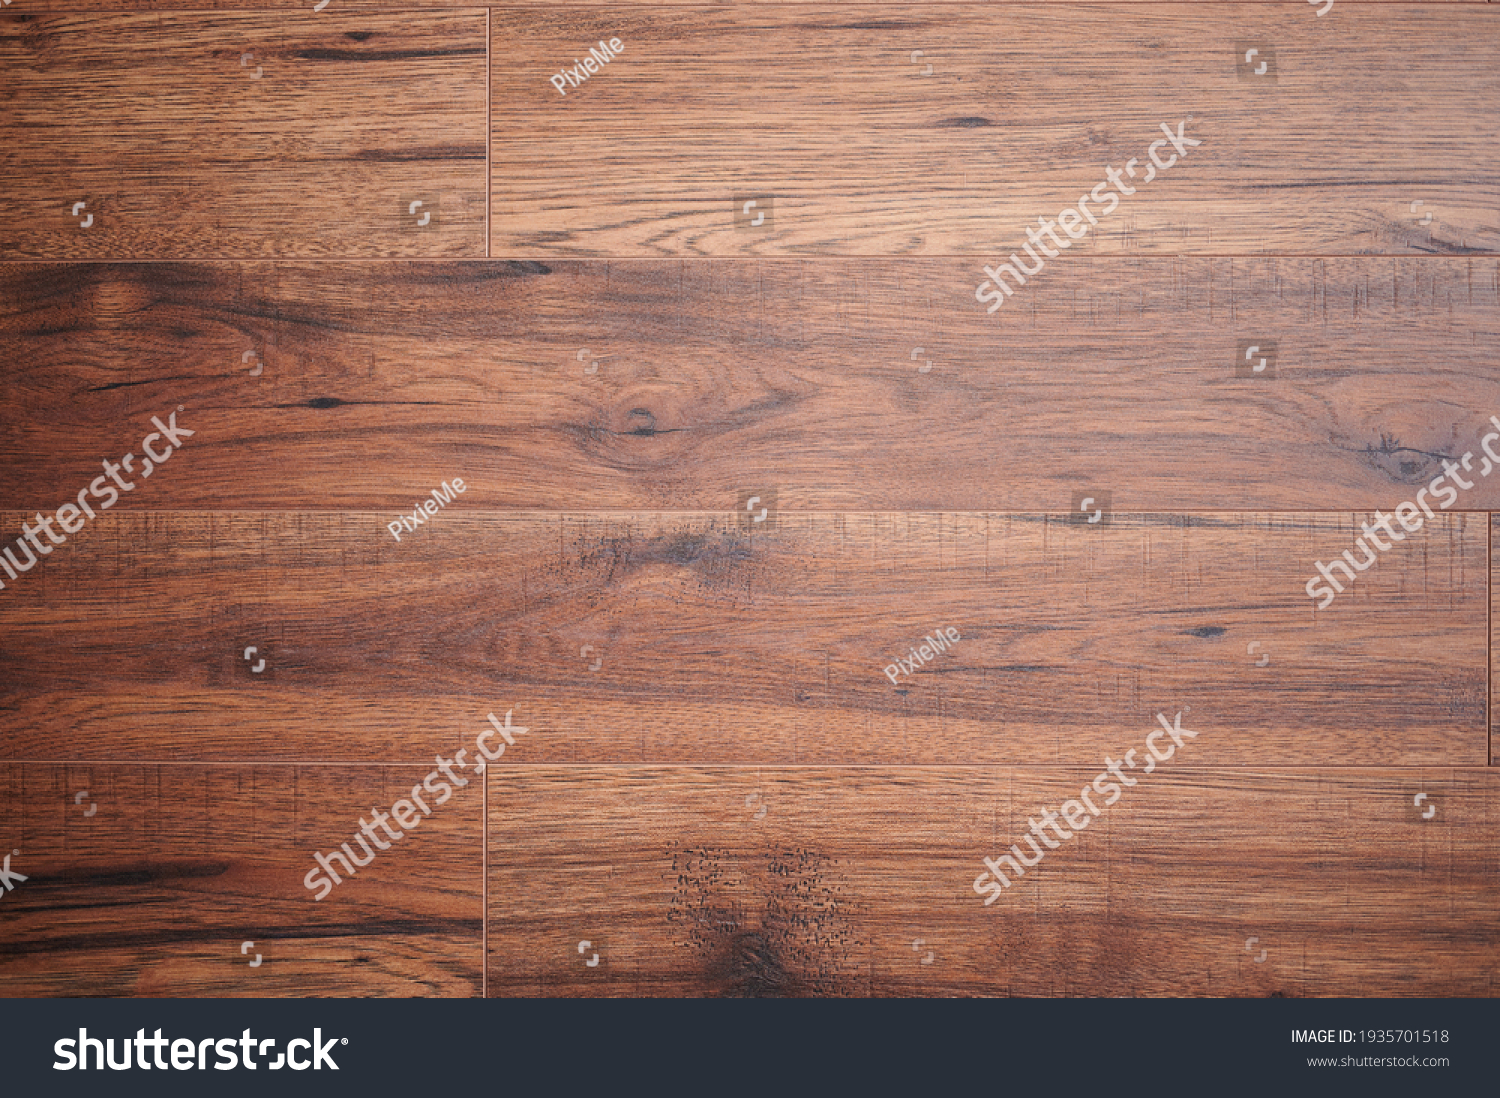 Pattern of wooden plank brown dark color close up view #1935701518